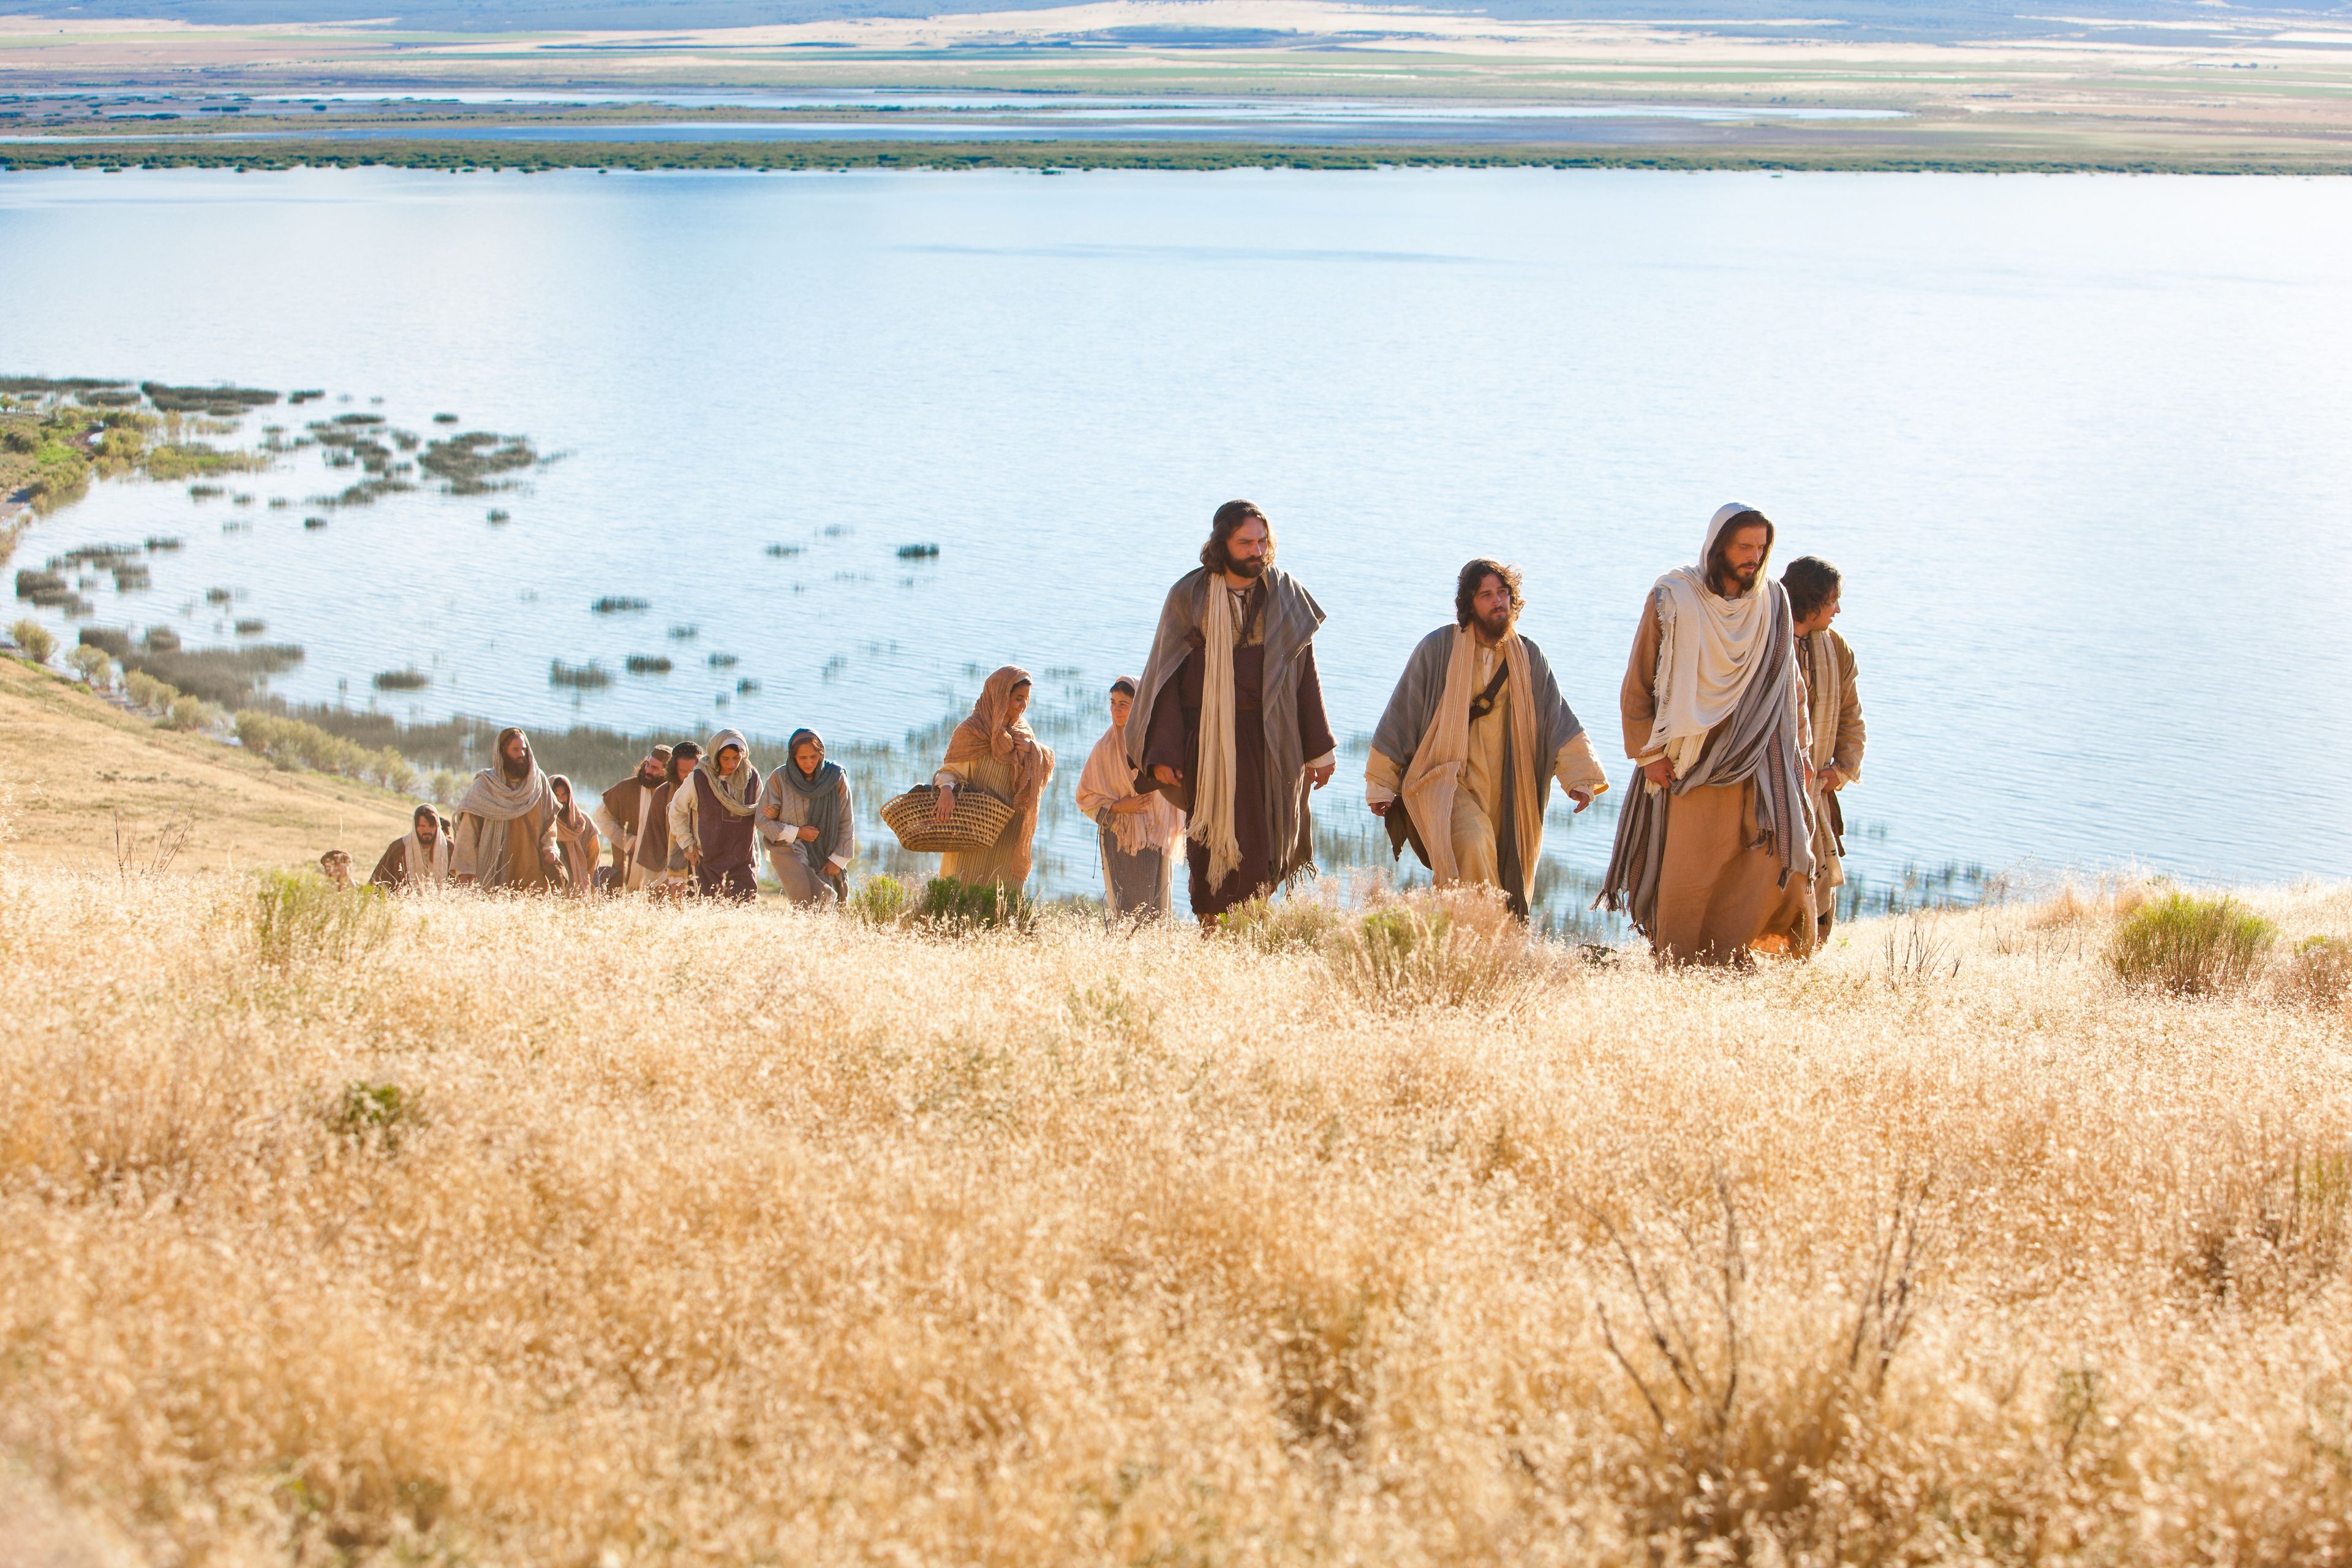 Men and women gather to come listen to Jesus as He gives His Sermon on the Mount.